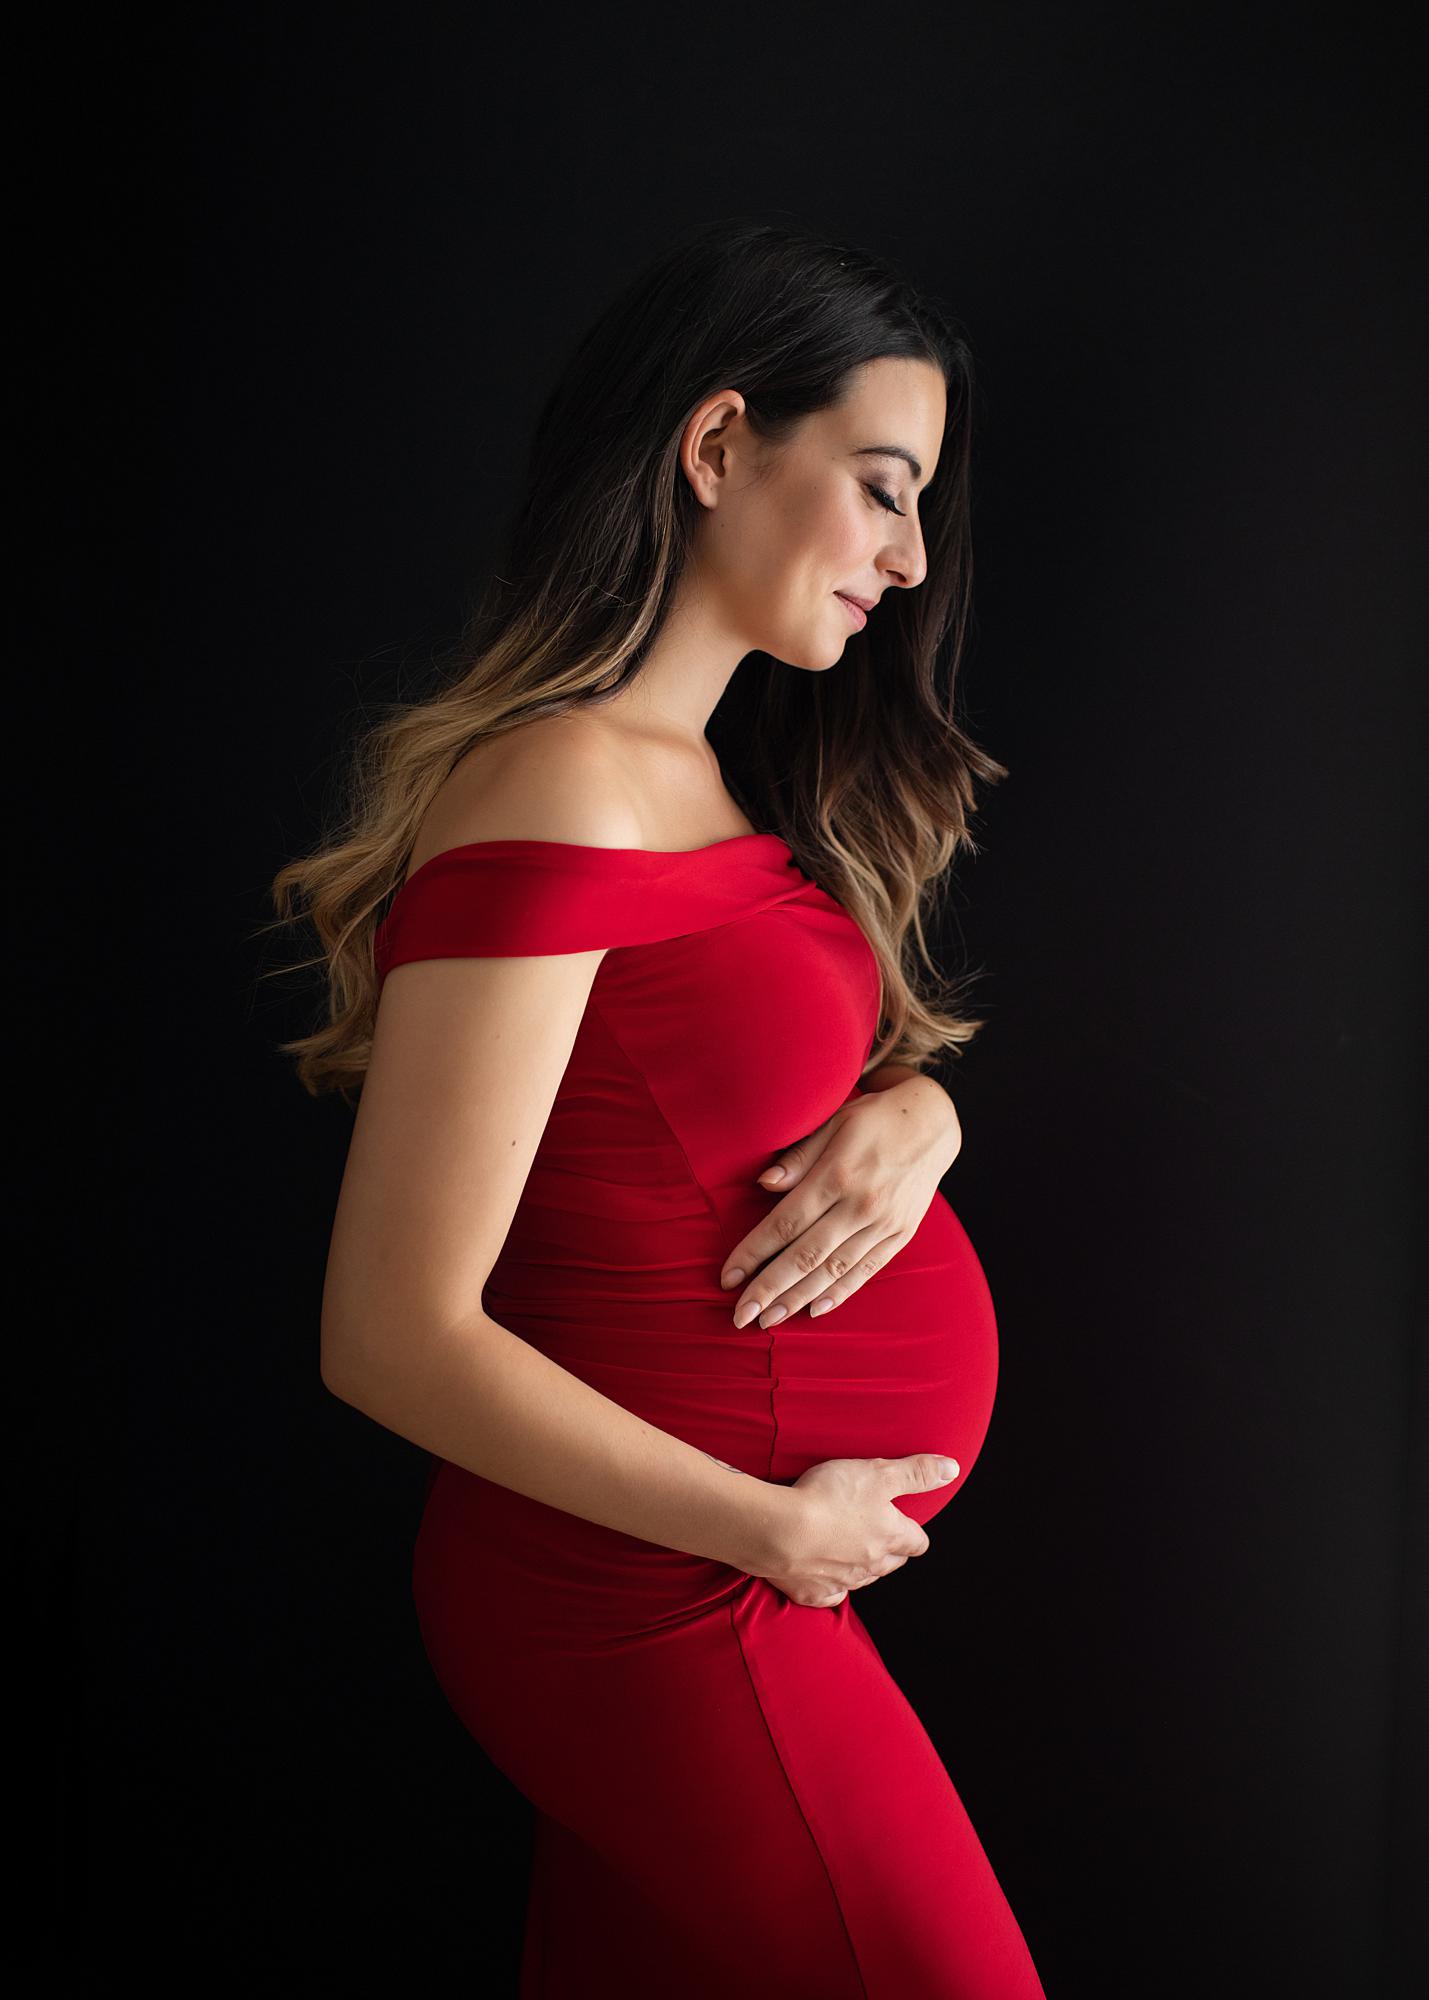 Pregnant lady in red dress looks down at her bump during Maternity Shoot